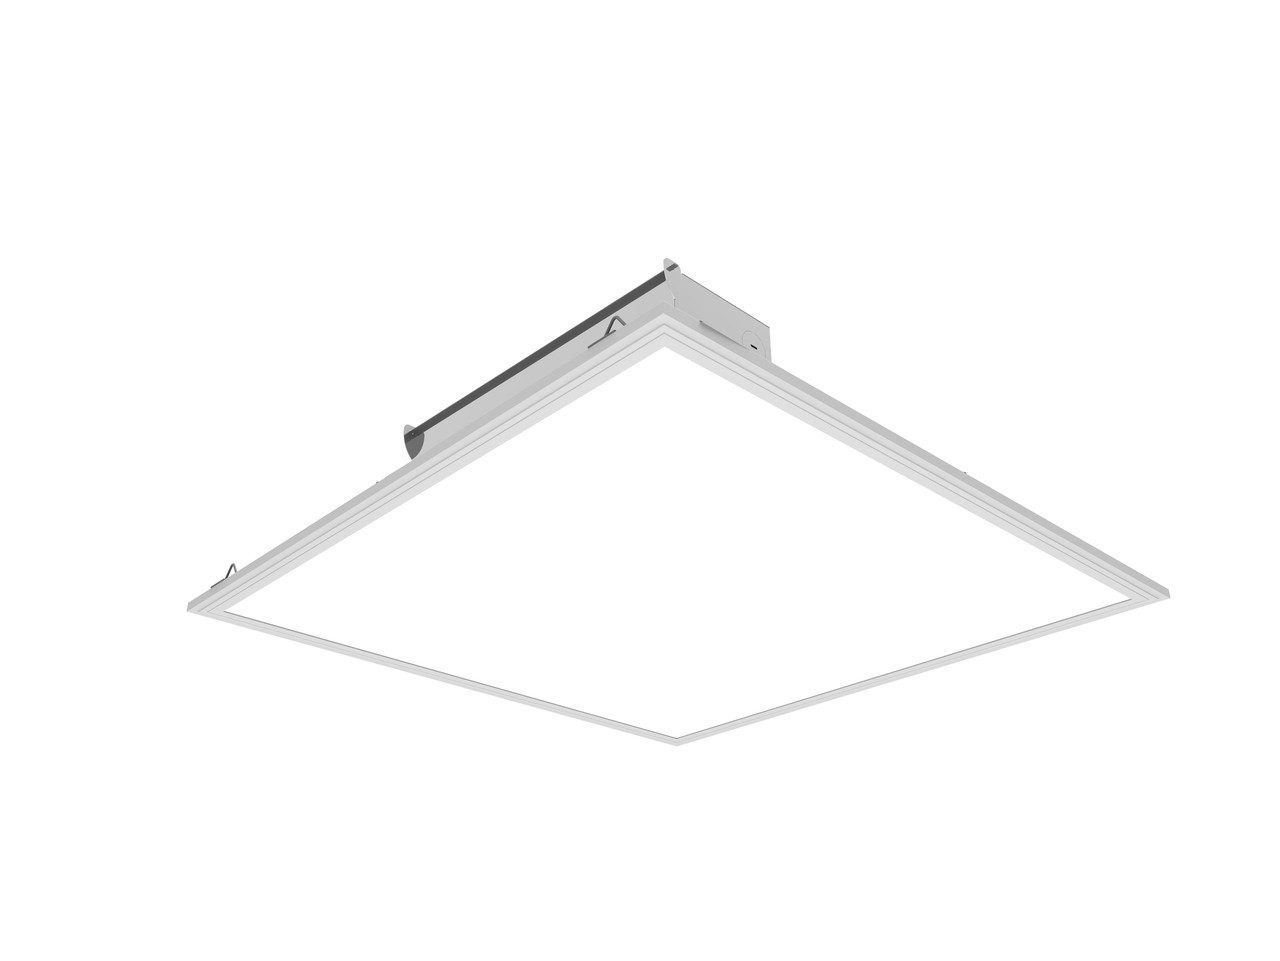 2x2 LED Flat Panel - 40 Watt - 4000 Lumens - 35K/40K/50K Color Selectable - 120-277V - Dimmable - With Surface Mount Kit